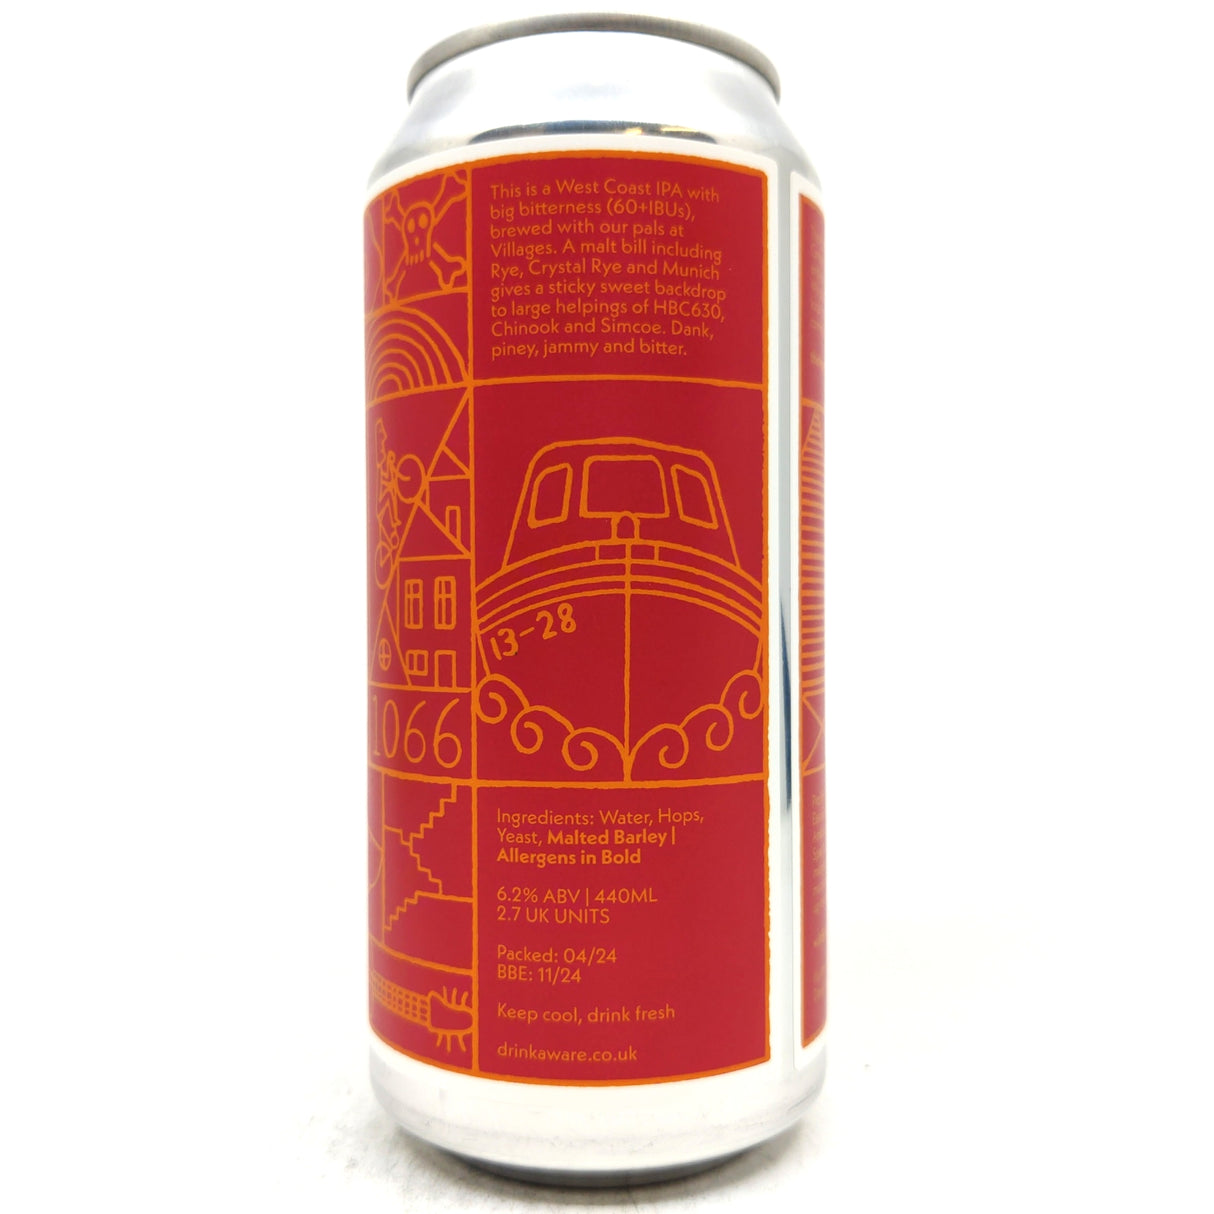 The Hastings Project West Coast IPA 6.2% (440ml can)-Hop Burns & Black